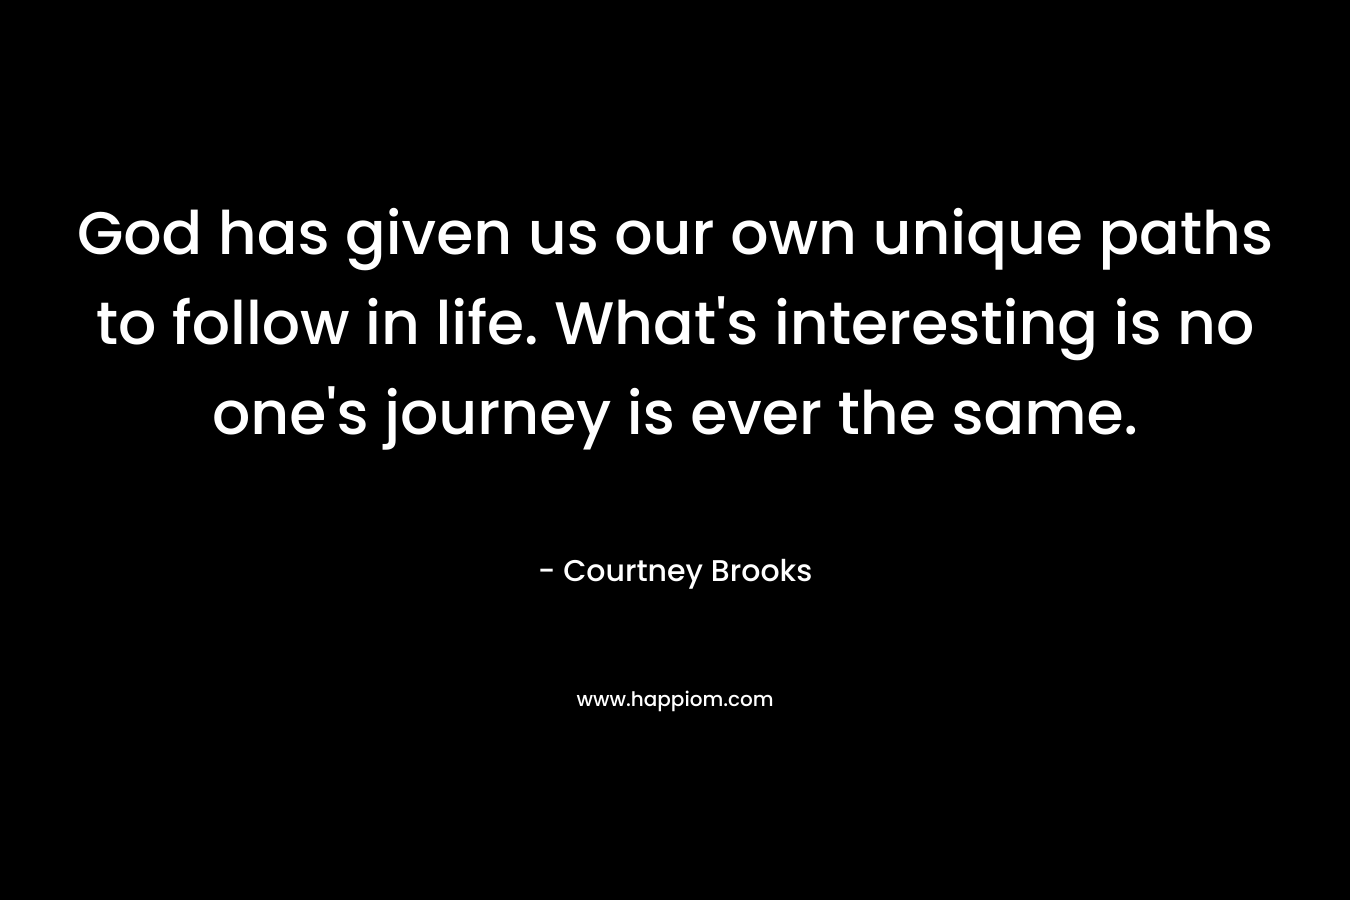 God has given us our own unique paths to follow in life. What's interesting is no one's journey is ever the same.